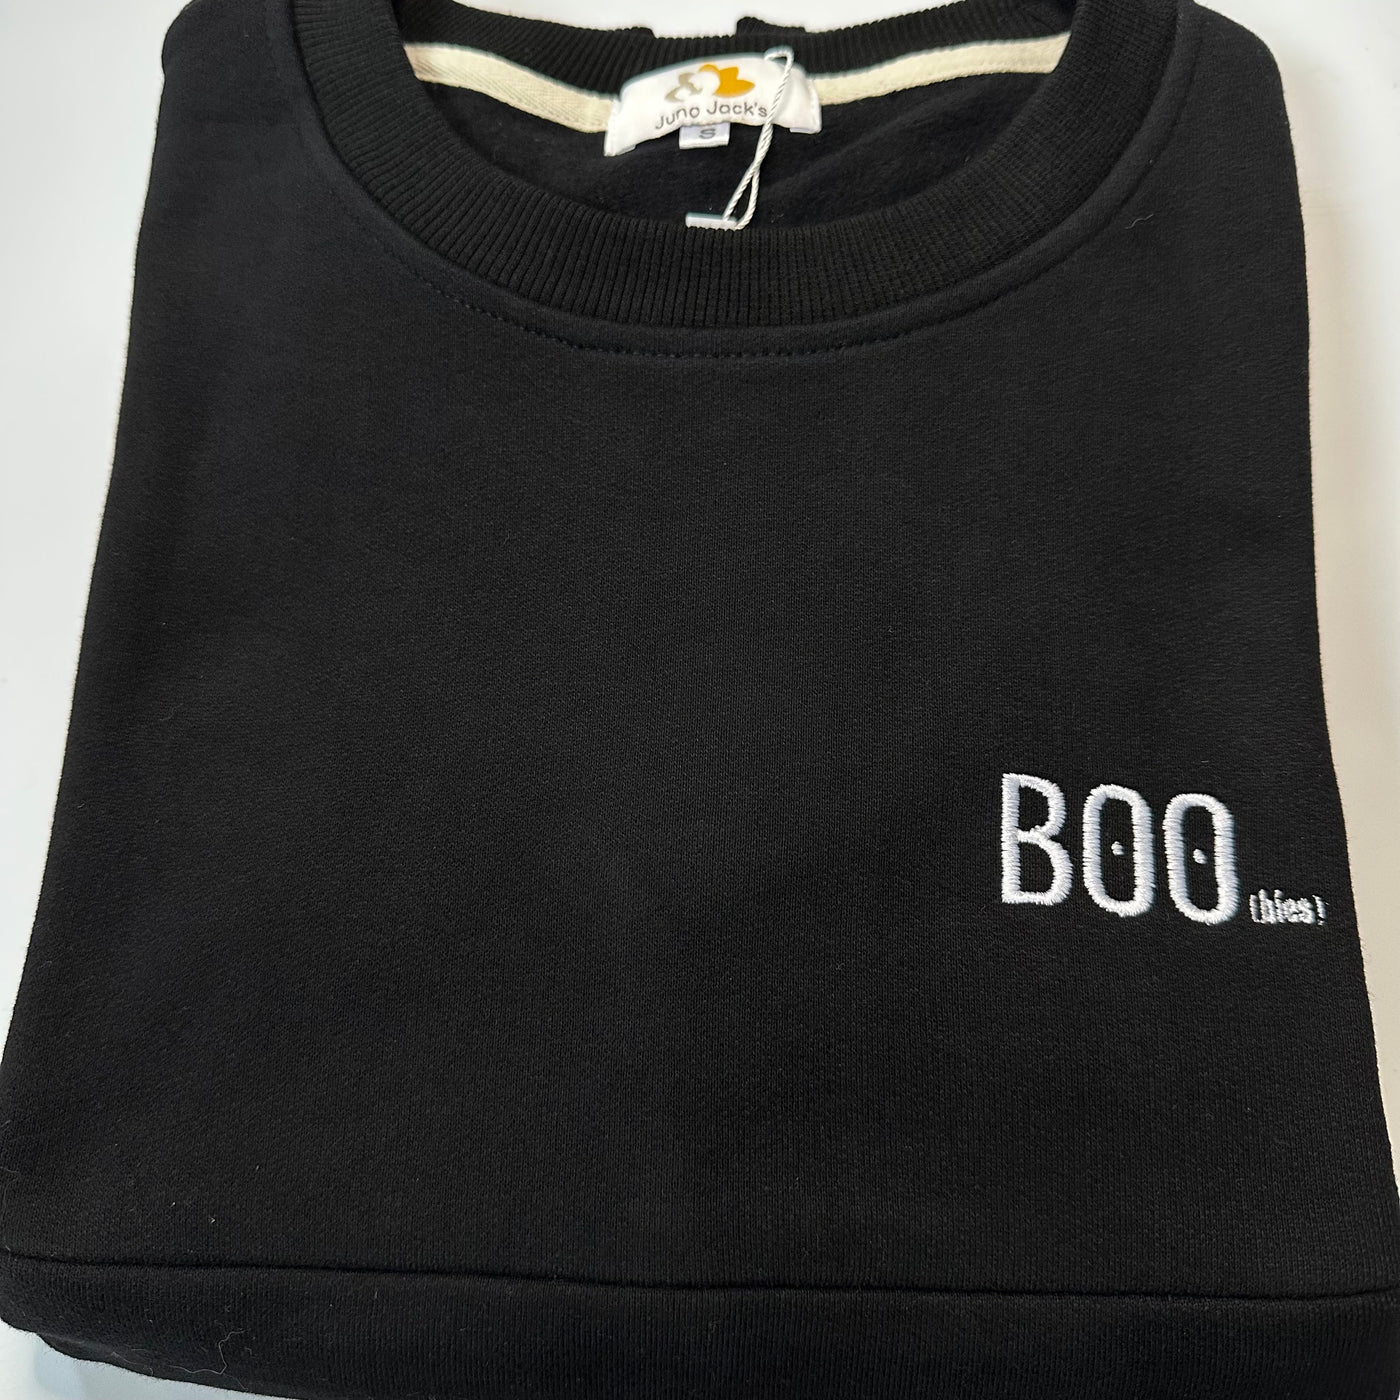 Ready Made - BOO(bies) Nursing Sweatshirt with TwinZip® - Badge Style Embroidery Size S (6/8)